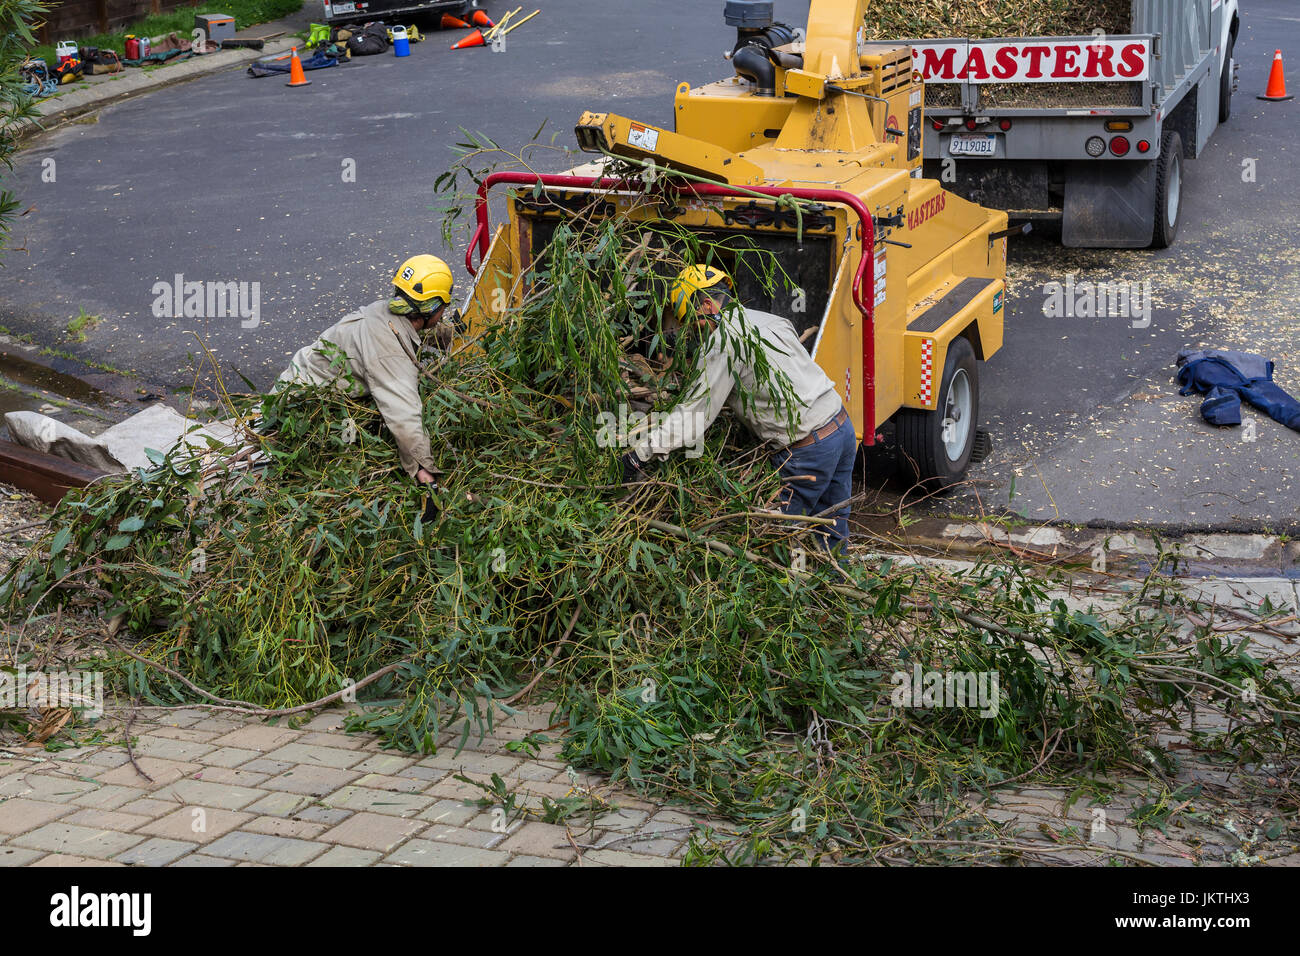 tree trimming service, workers putting blue-gum eucalyptus tree branches into wood chipper, city of Novato, Marin County, California Stock Photo